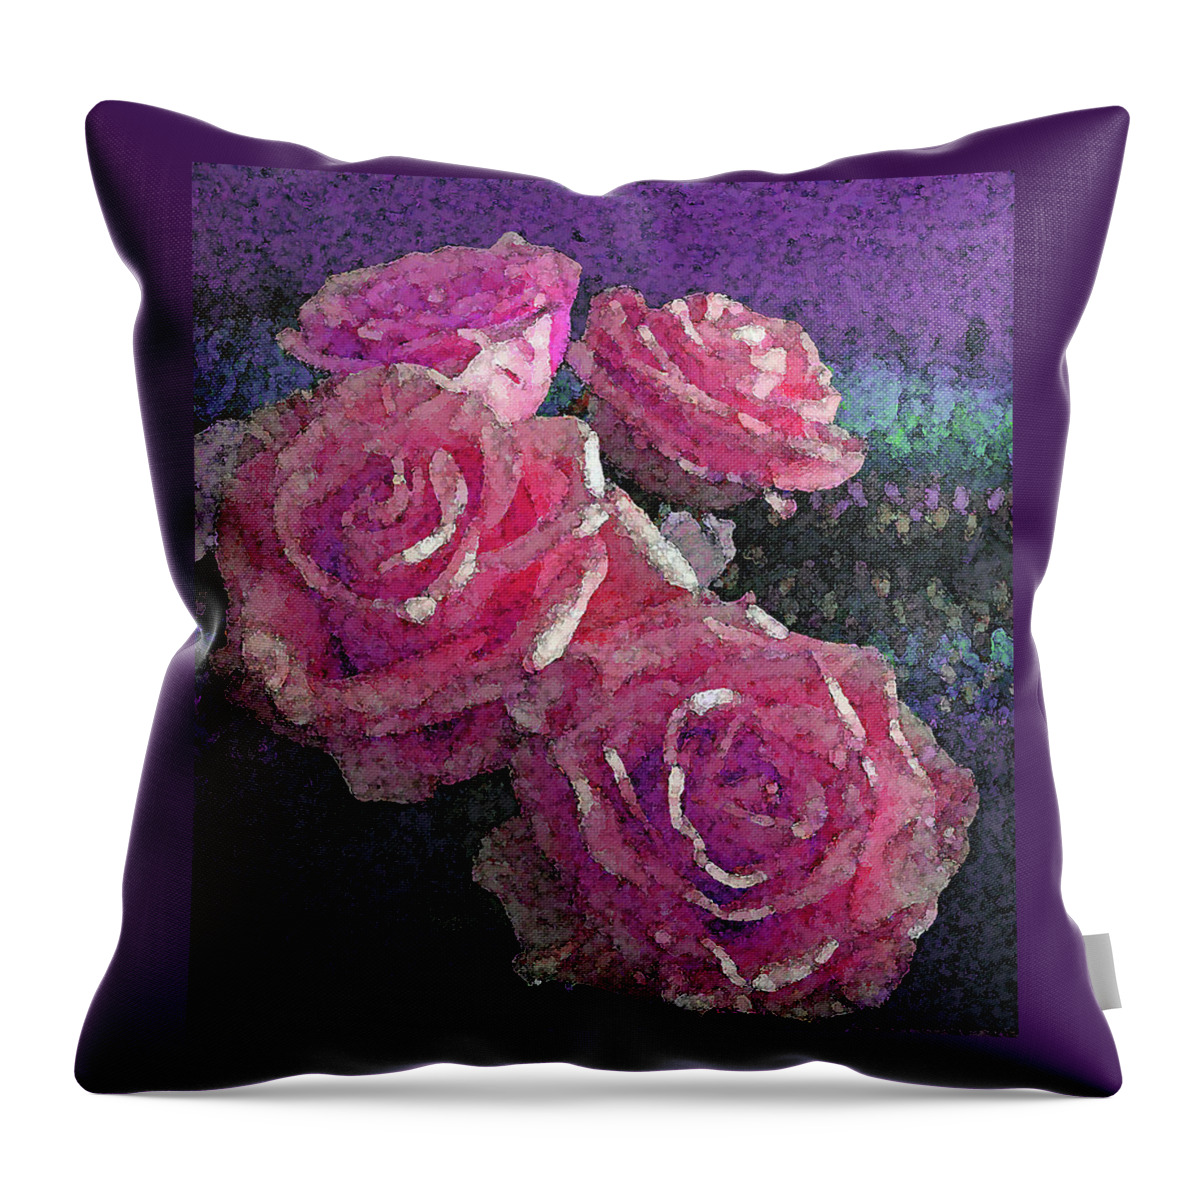 Roses Throw Pillow featuring the photograph Four Pink Roses by Corinne Carroll